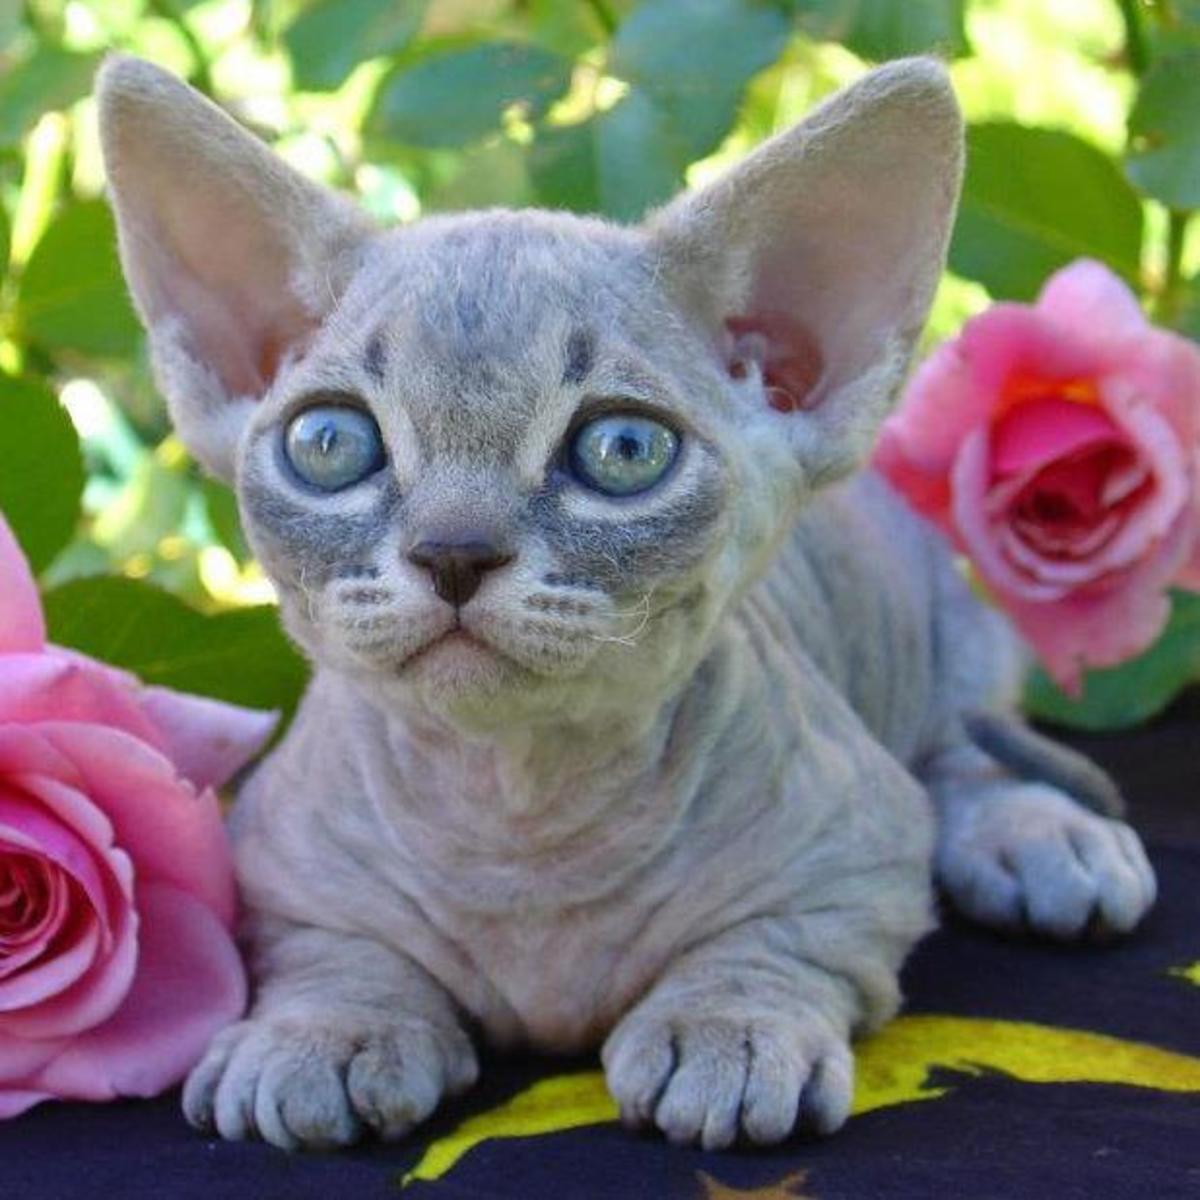 Minskin, sometimes confused with a Bambino, is a breed developed from a cross between the Munchkin and the Sphynx like the Bambino cat. 